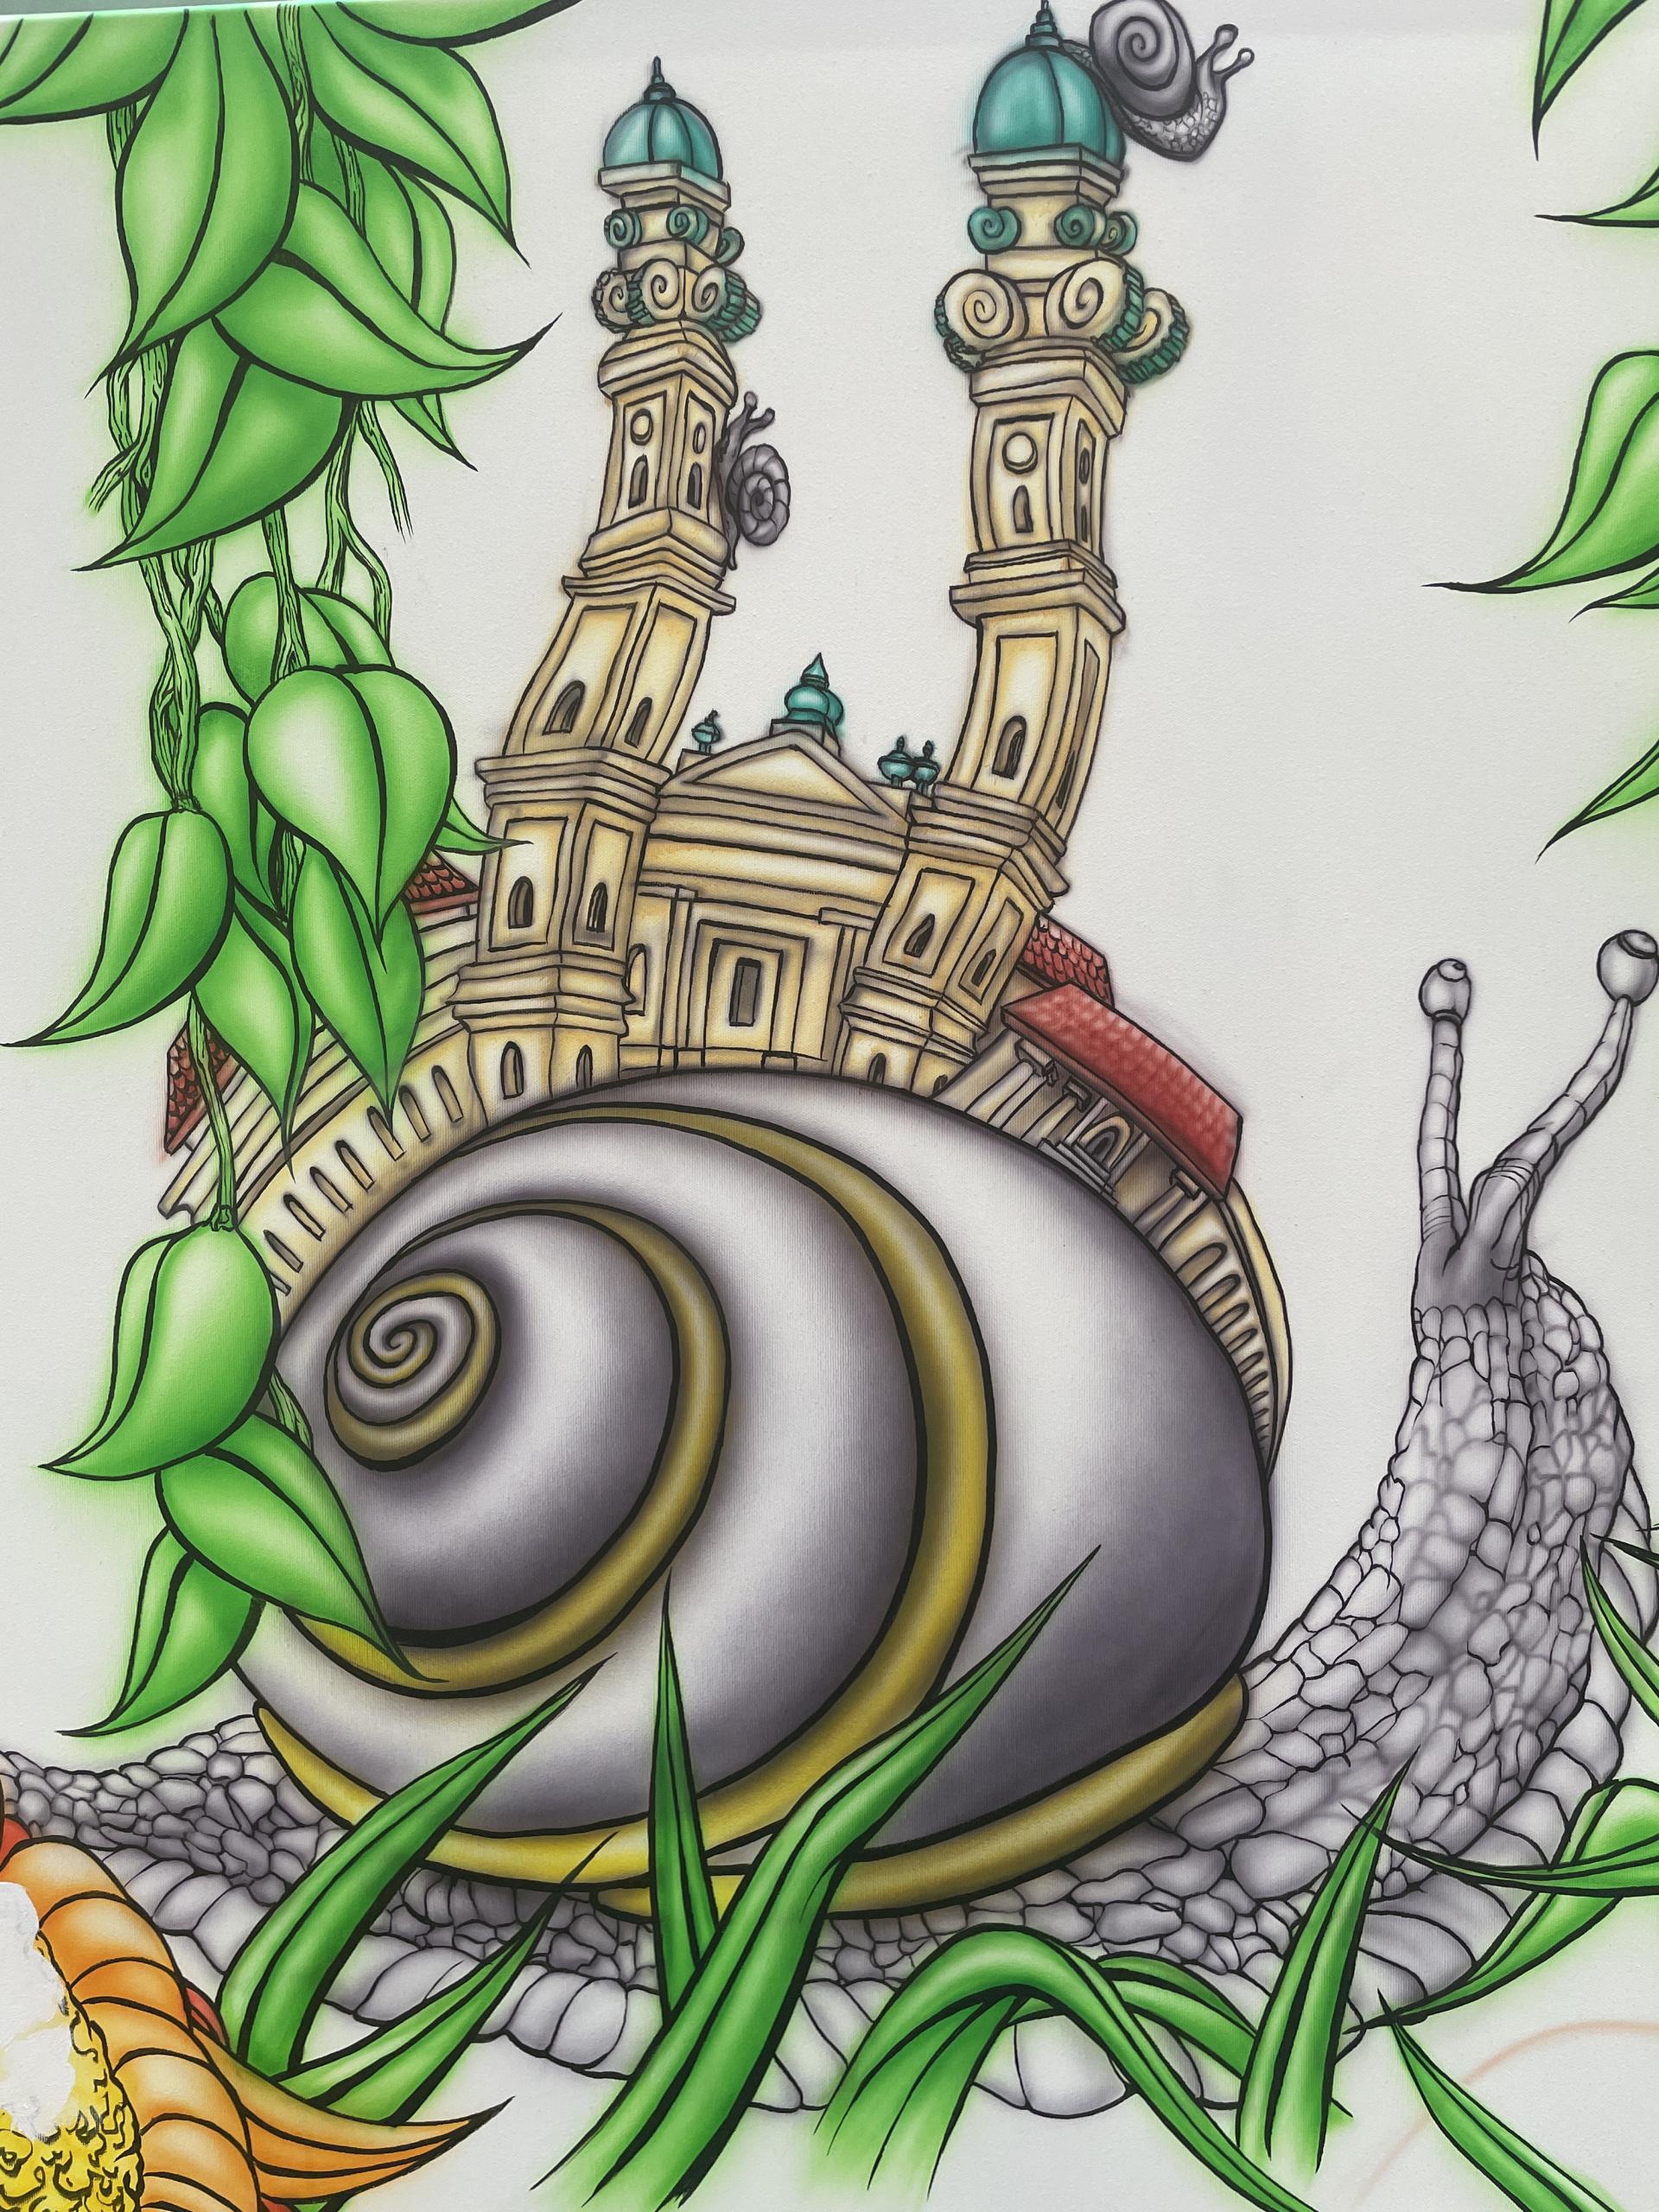 The painted image of a snail, entwined with green plants. The spires of Munich's Theatinerkirche grow out of the snail's shell.